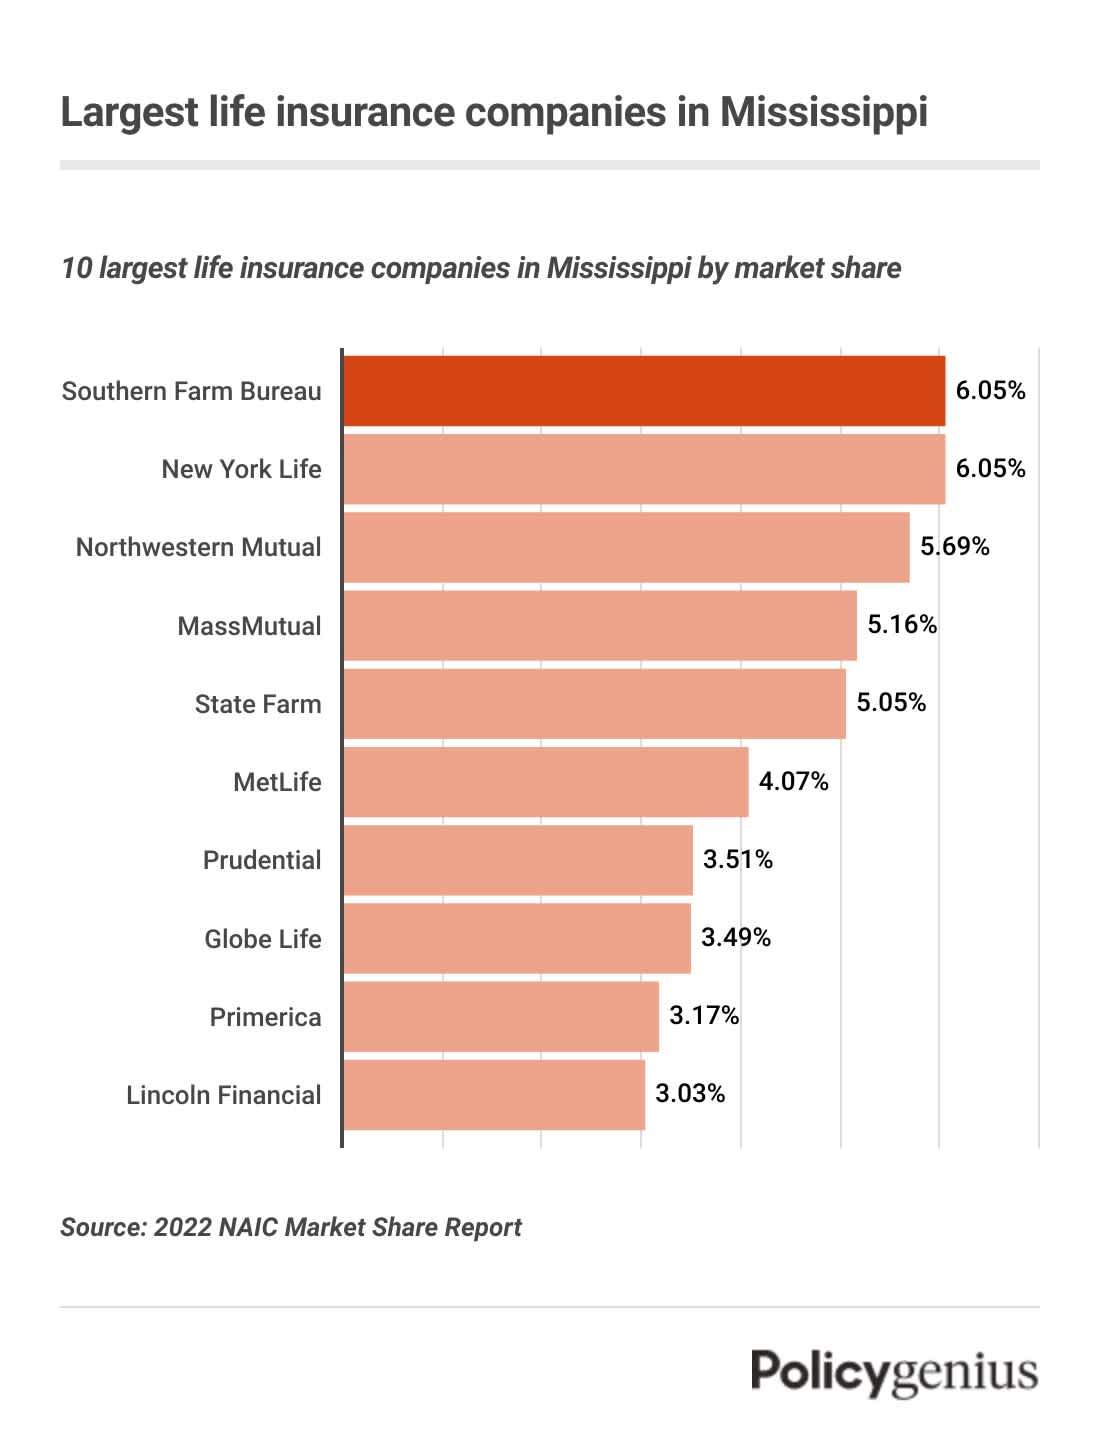 A bar graph showing the largest life insurance companies by market share in Mississippi. Southern Farm Bureau is the largest.